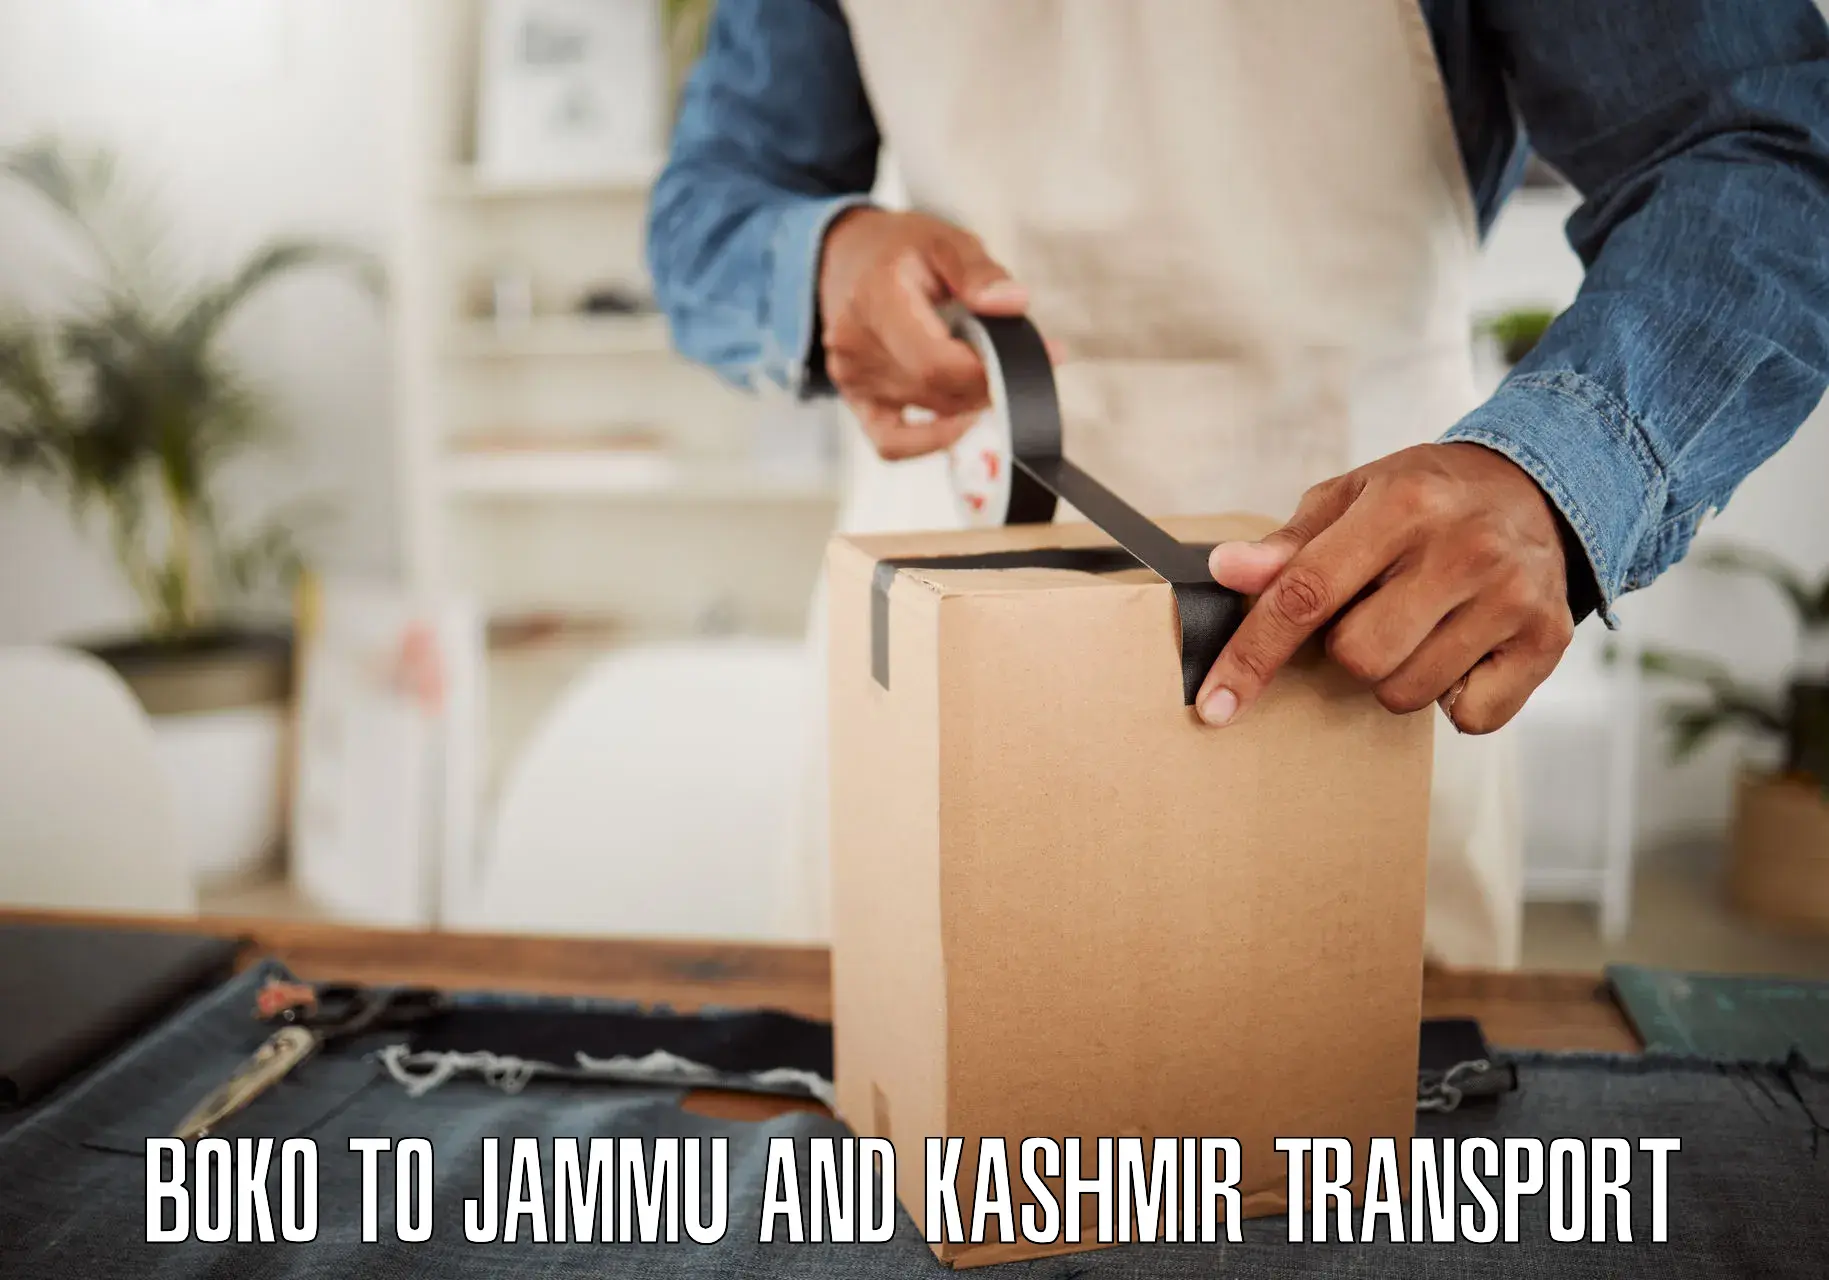 Truck transport companies in India Boko to Jammu and Kashmir